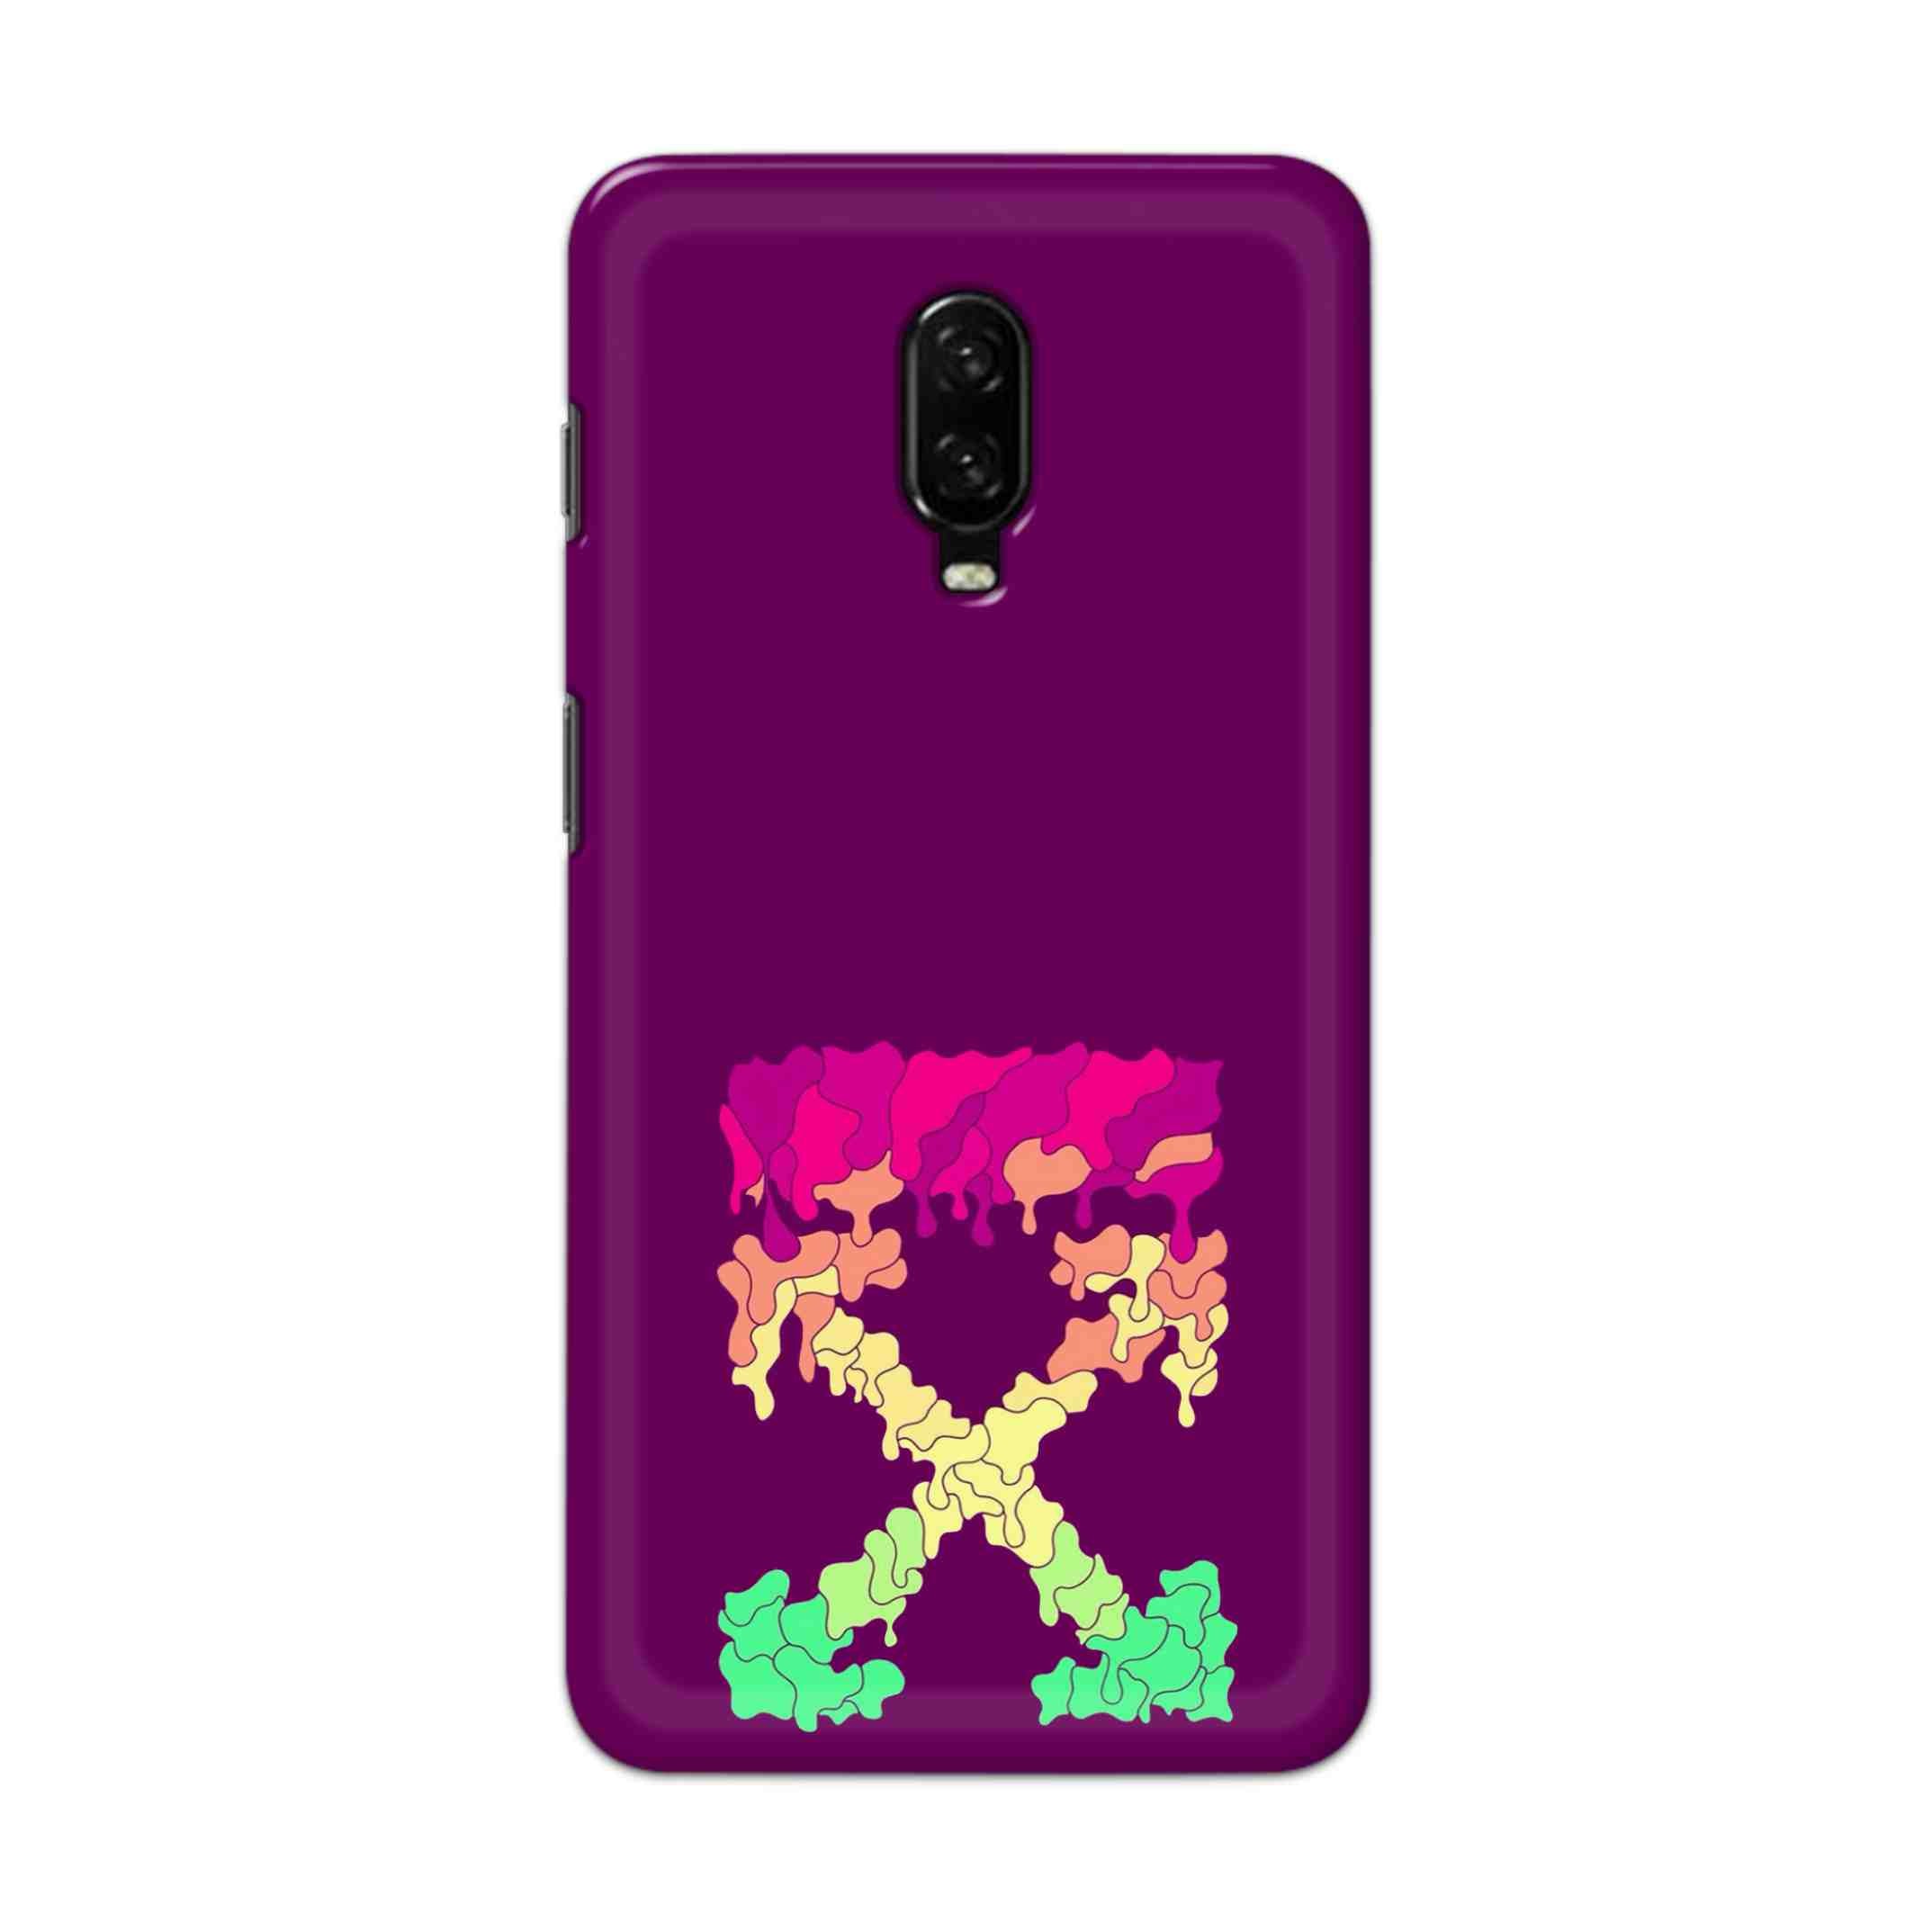 Buy X.O Hard Back Mobile Phone Case Cover For OnePlus 6T Online